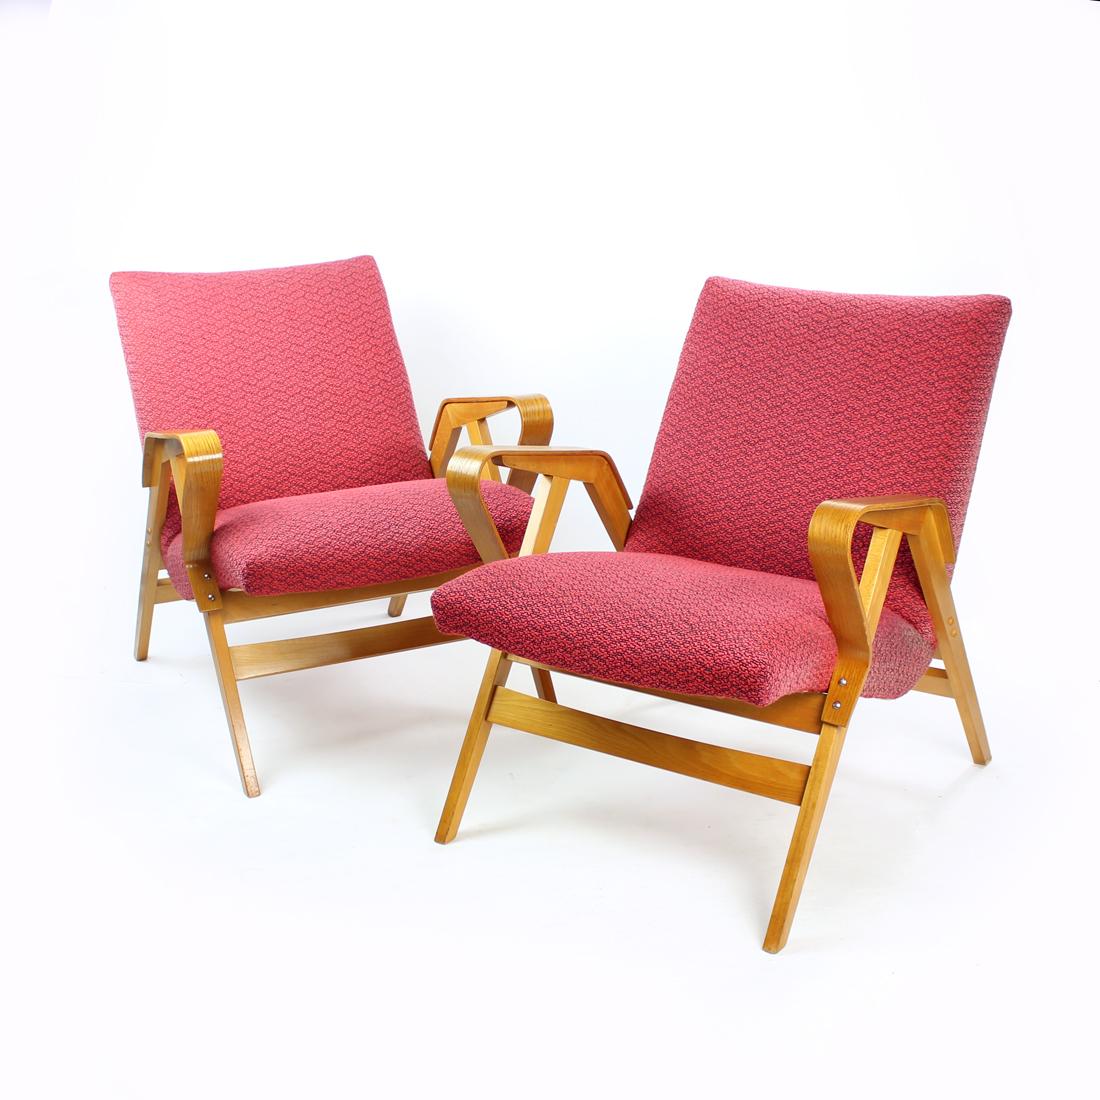 Beautiful armchair produced by Tatra company in Czechoslovakia in 1960s. The original label is still attached. The chairs are a well known and comfortable model produced in Czechoslovakia. Designed on a oak wood construction with bent plywood